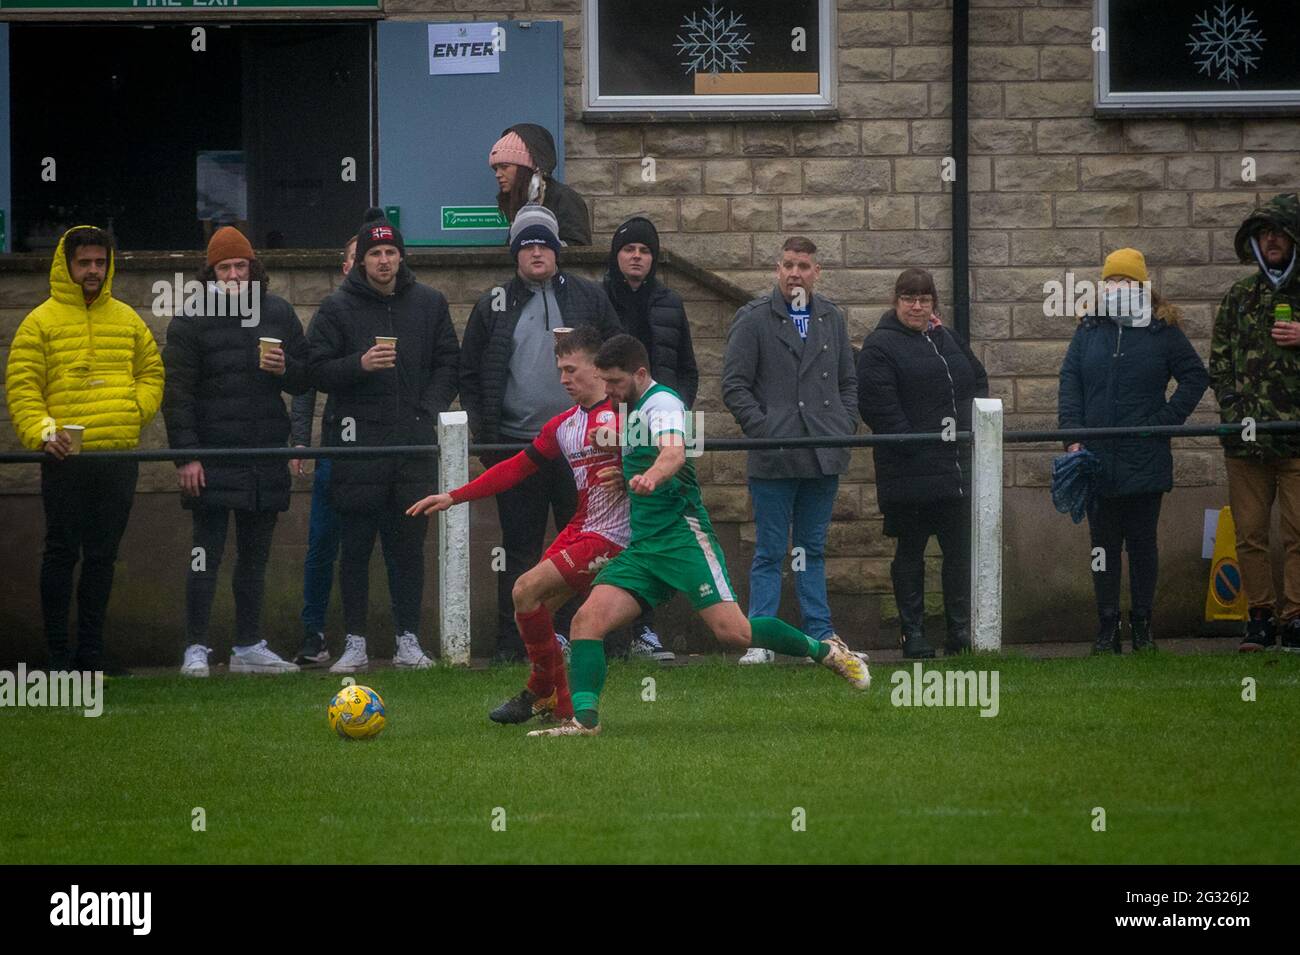 Midsomer Norton, Somerset, England 26 December 2020. Toolstation Western League Division One match between Welton Rovers and Radstock Town. Stock Photo